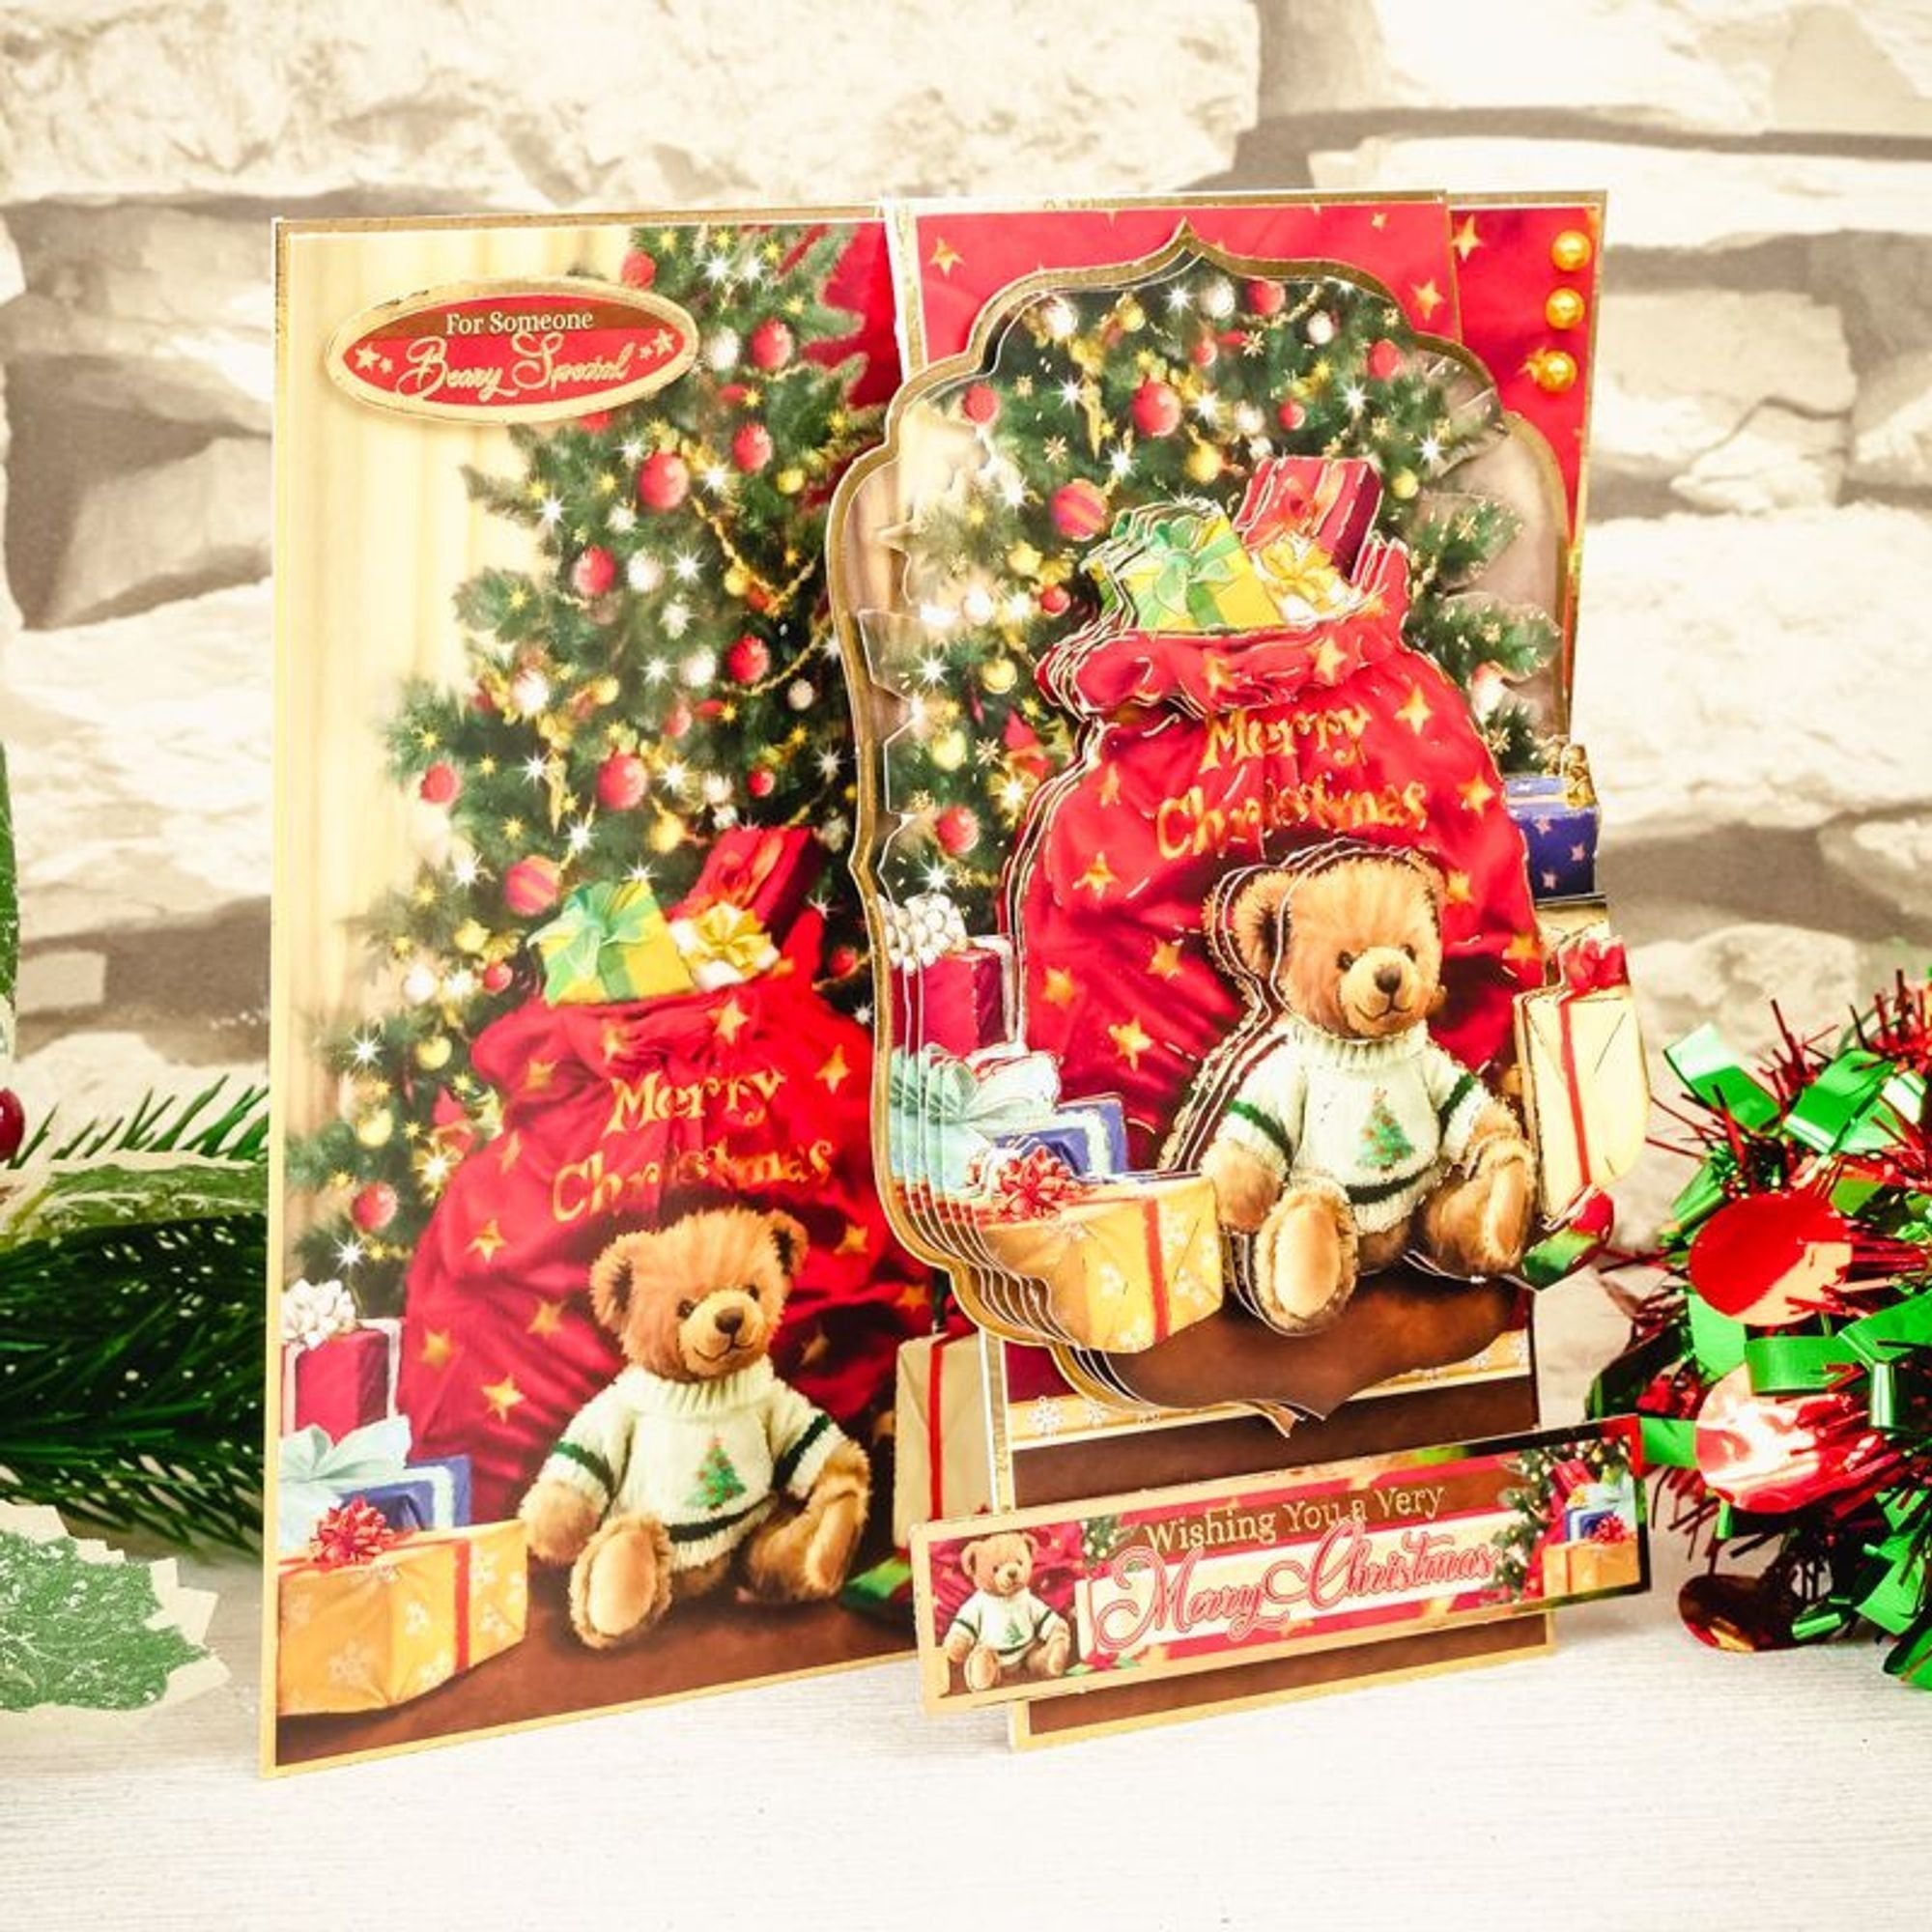 Christmas Wishes Deco-Large Set - A Beary Merry Christmas